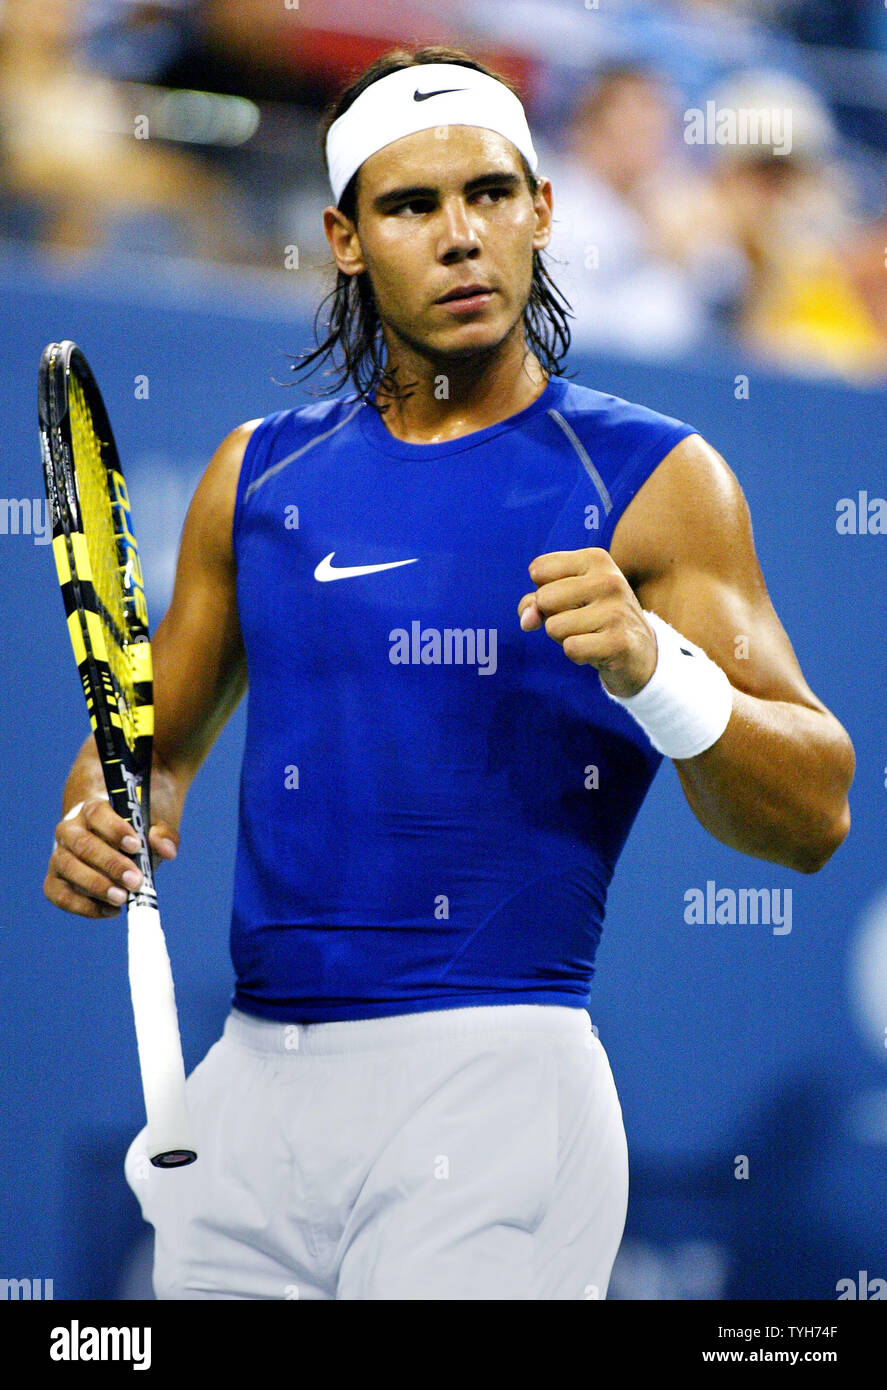 Rafael Nadal of Spain, who is seeded second, reacts as he scores a point  off of Scoville Jenkins (USA) during the first set of their match at the US  Open on August